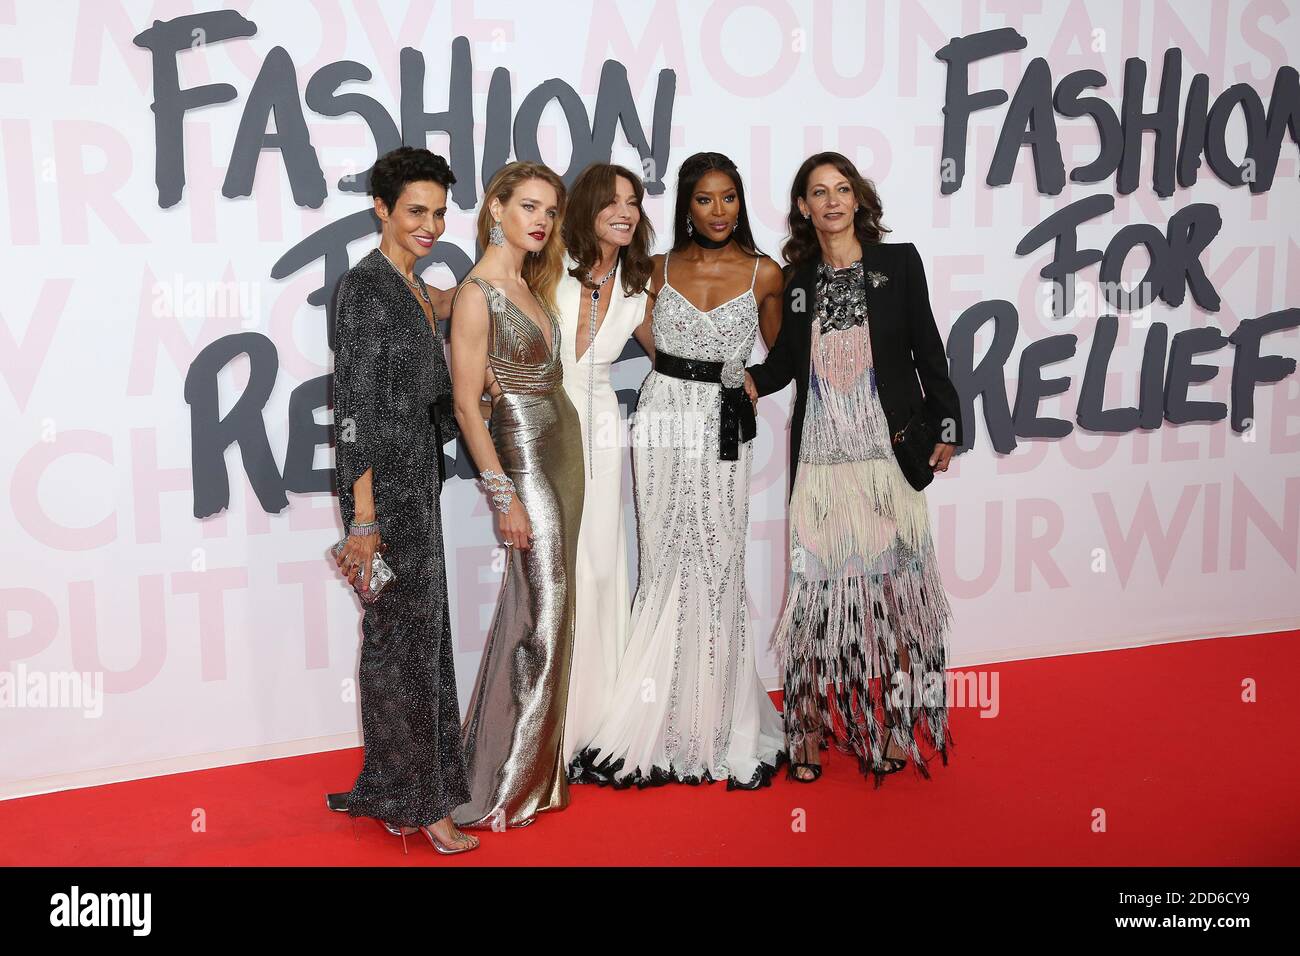 Farida Khelfa, Natalia Vodianova, Carla Bruni, Naomi Campbell and Marpessa Hennink attend Fashion for Relief Cannes 2018 at Aeroport Cannes Mandelieu during the 71st annual Cannes Film Festival on May 13, 2018 in Cannes, France. Photo by Nasser Berzane/ABACAPRESS.COM Stock Photo